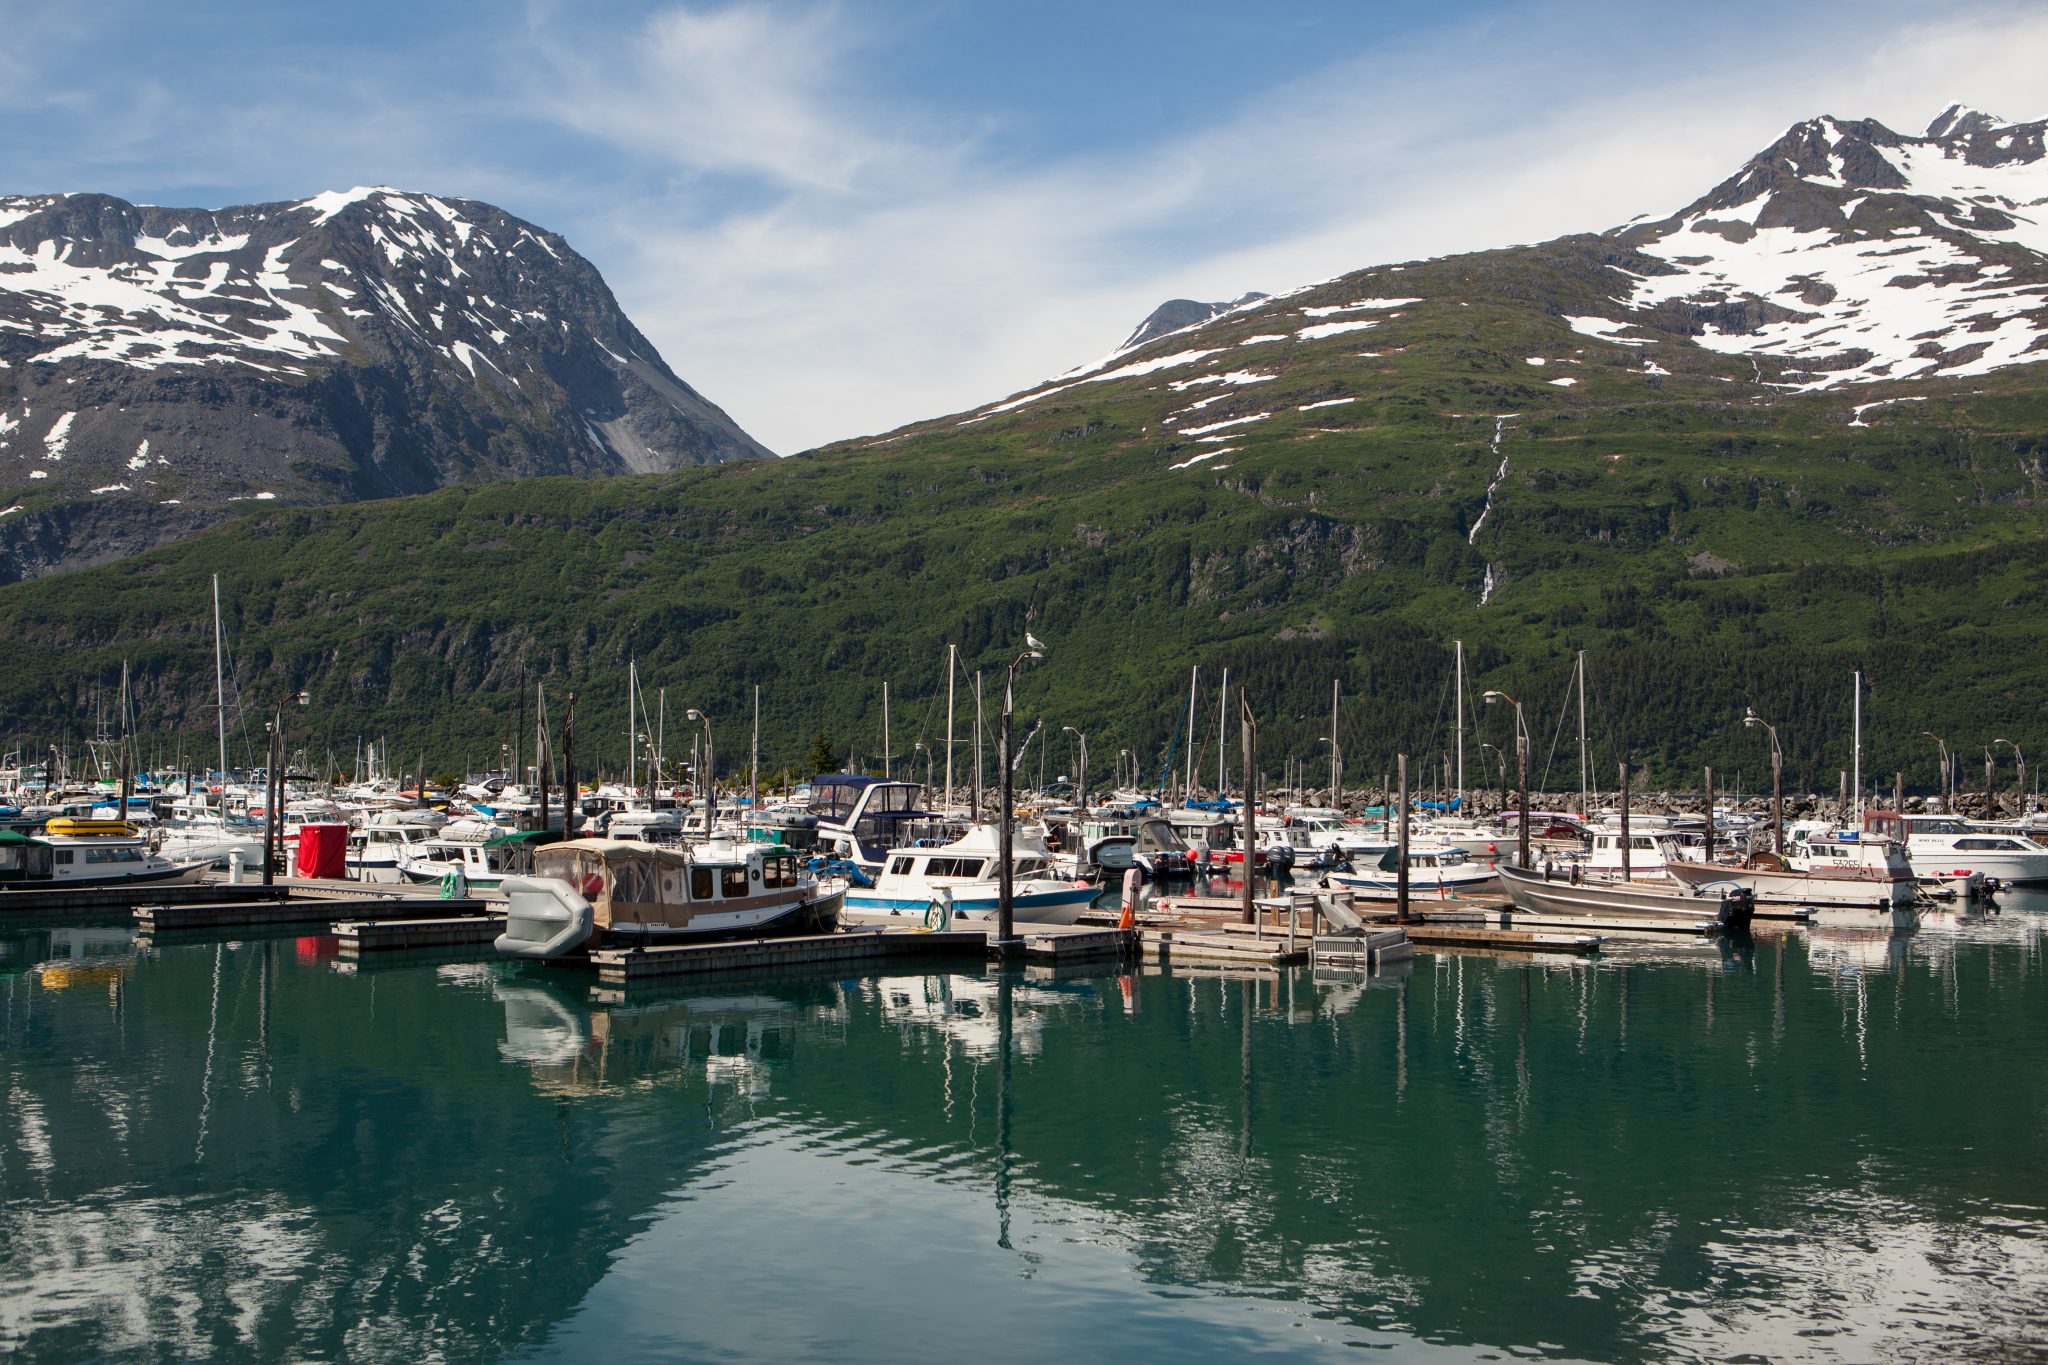 boats anchored in Whittier Harbor underneath two mountains that still hold scattered snow